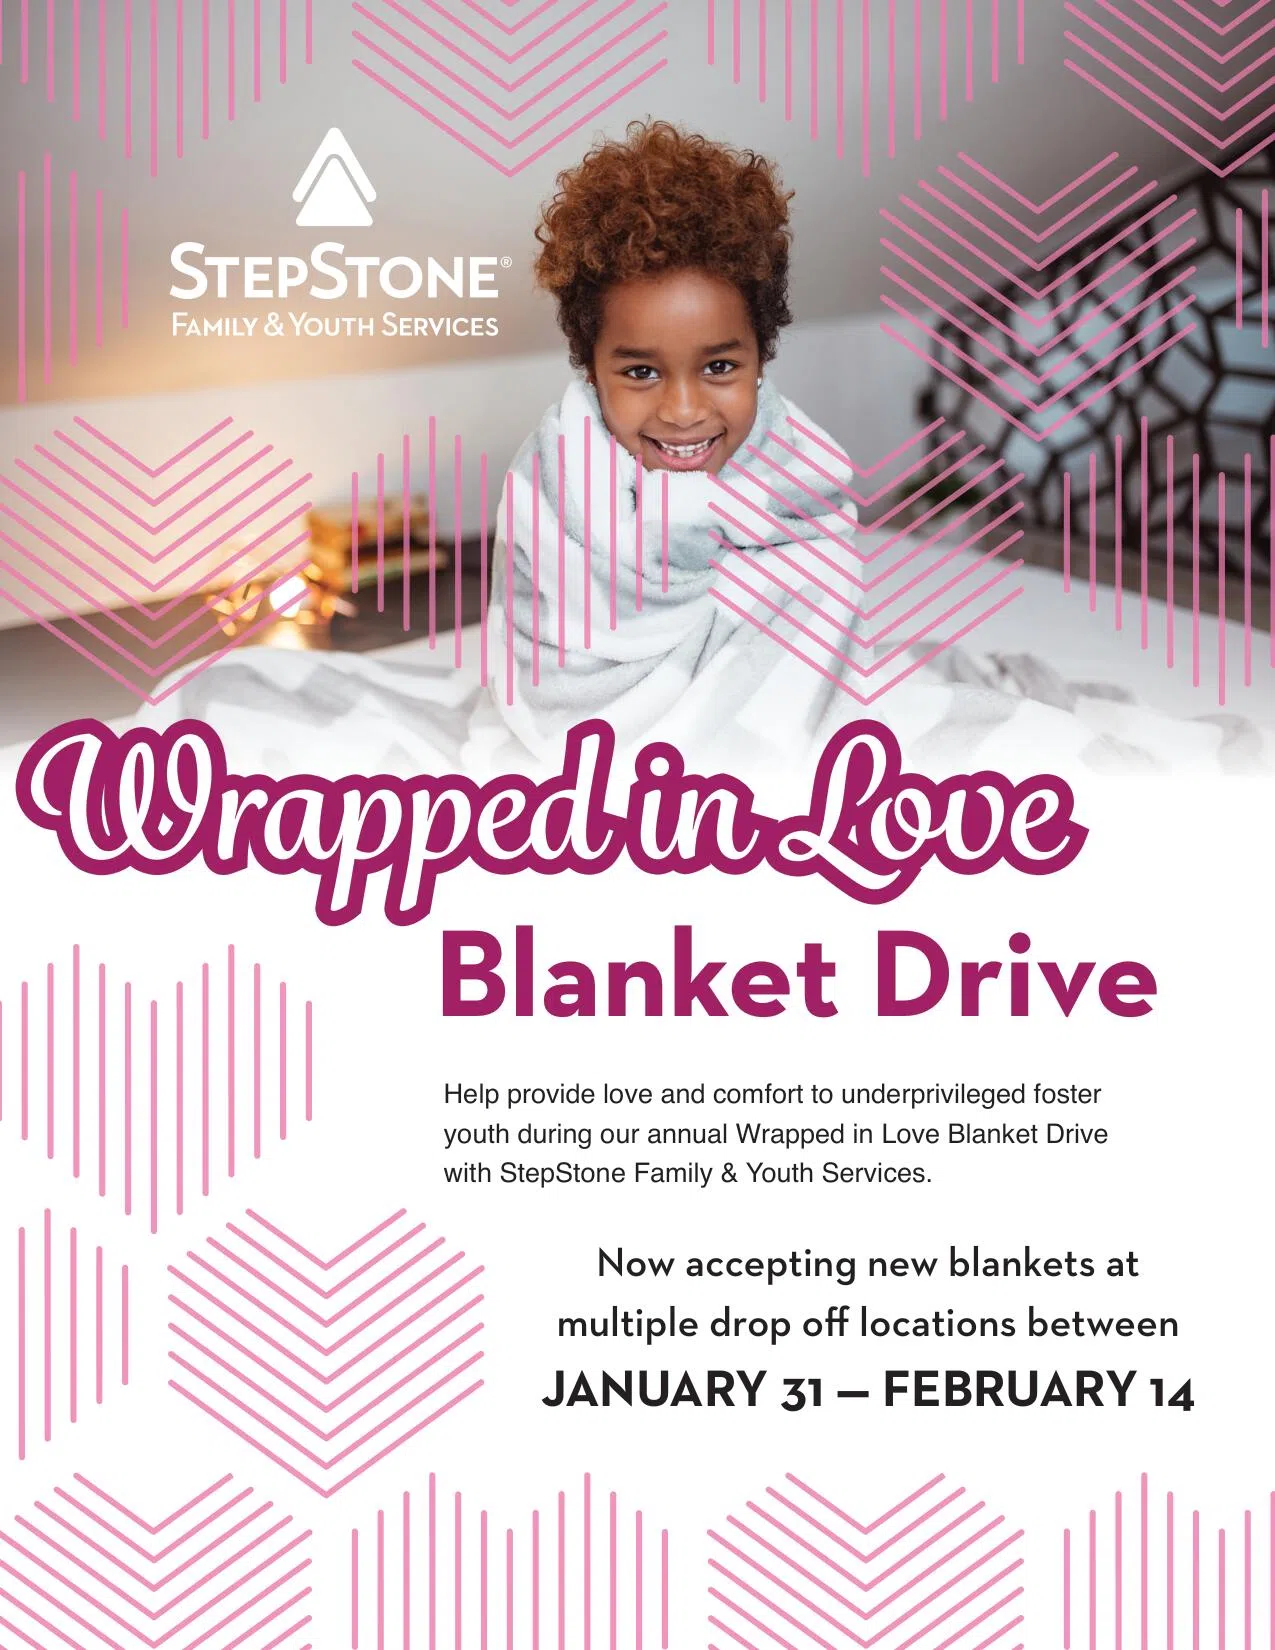 Eric Westrick: Wrapped In Love Blanket Drive